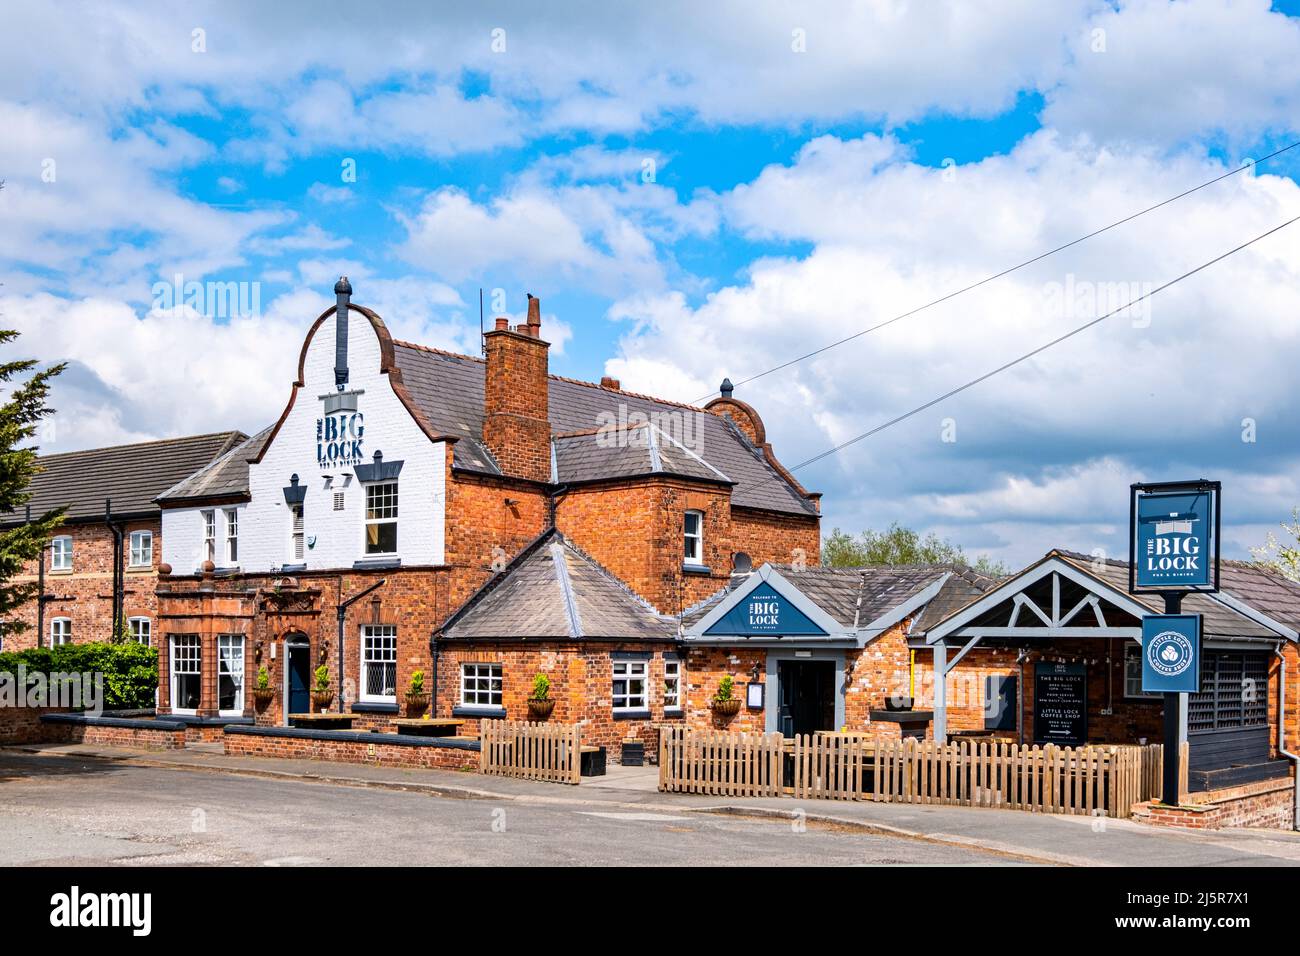 The Big Lock restaurant in Middlewich Cheshire UK Stock Photo